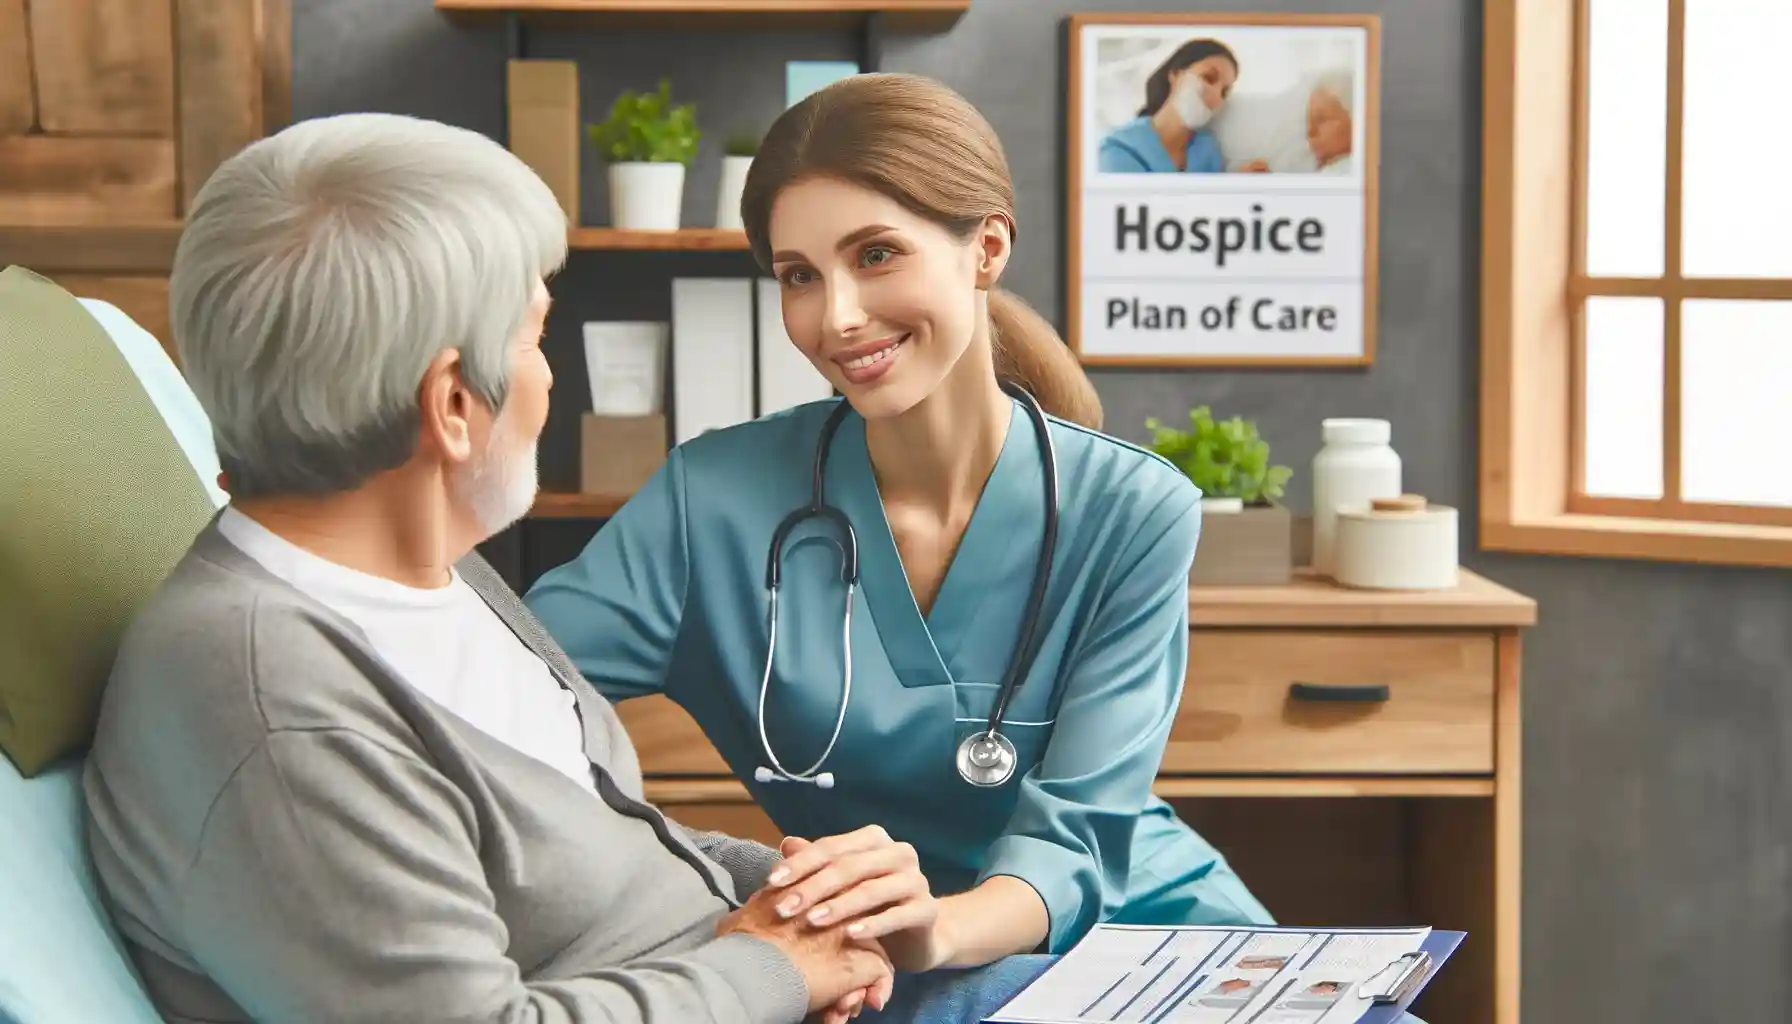 How to Start with Hospice Plan of Care Training